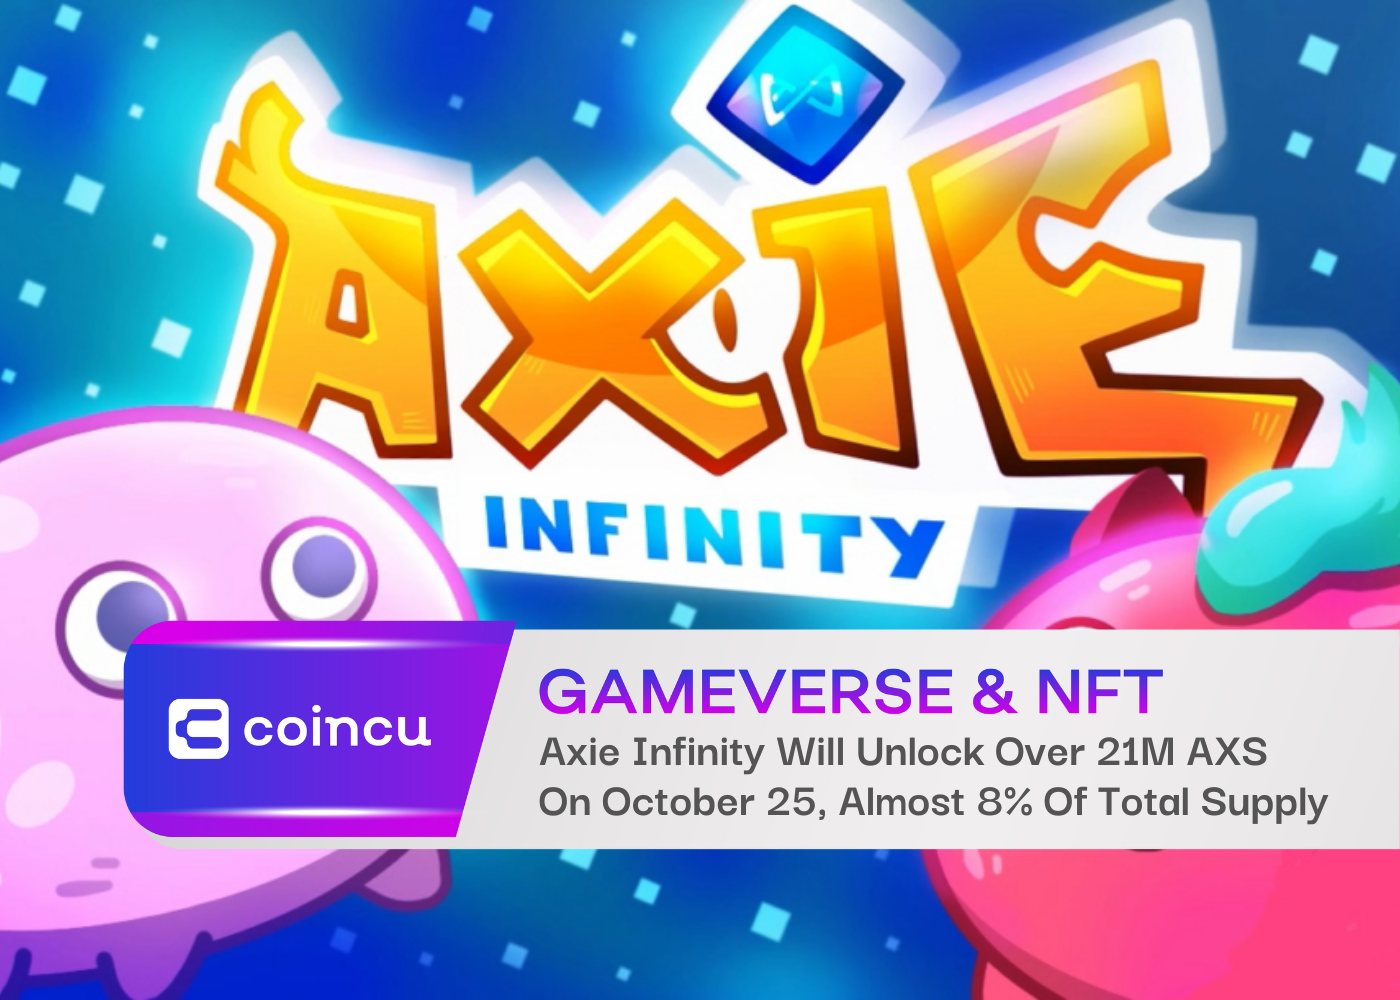 Axie Infinity Will Unlock Over 21M AXS On October 25, Almost 8% Of Total Supply